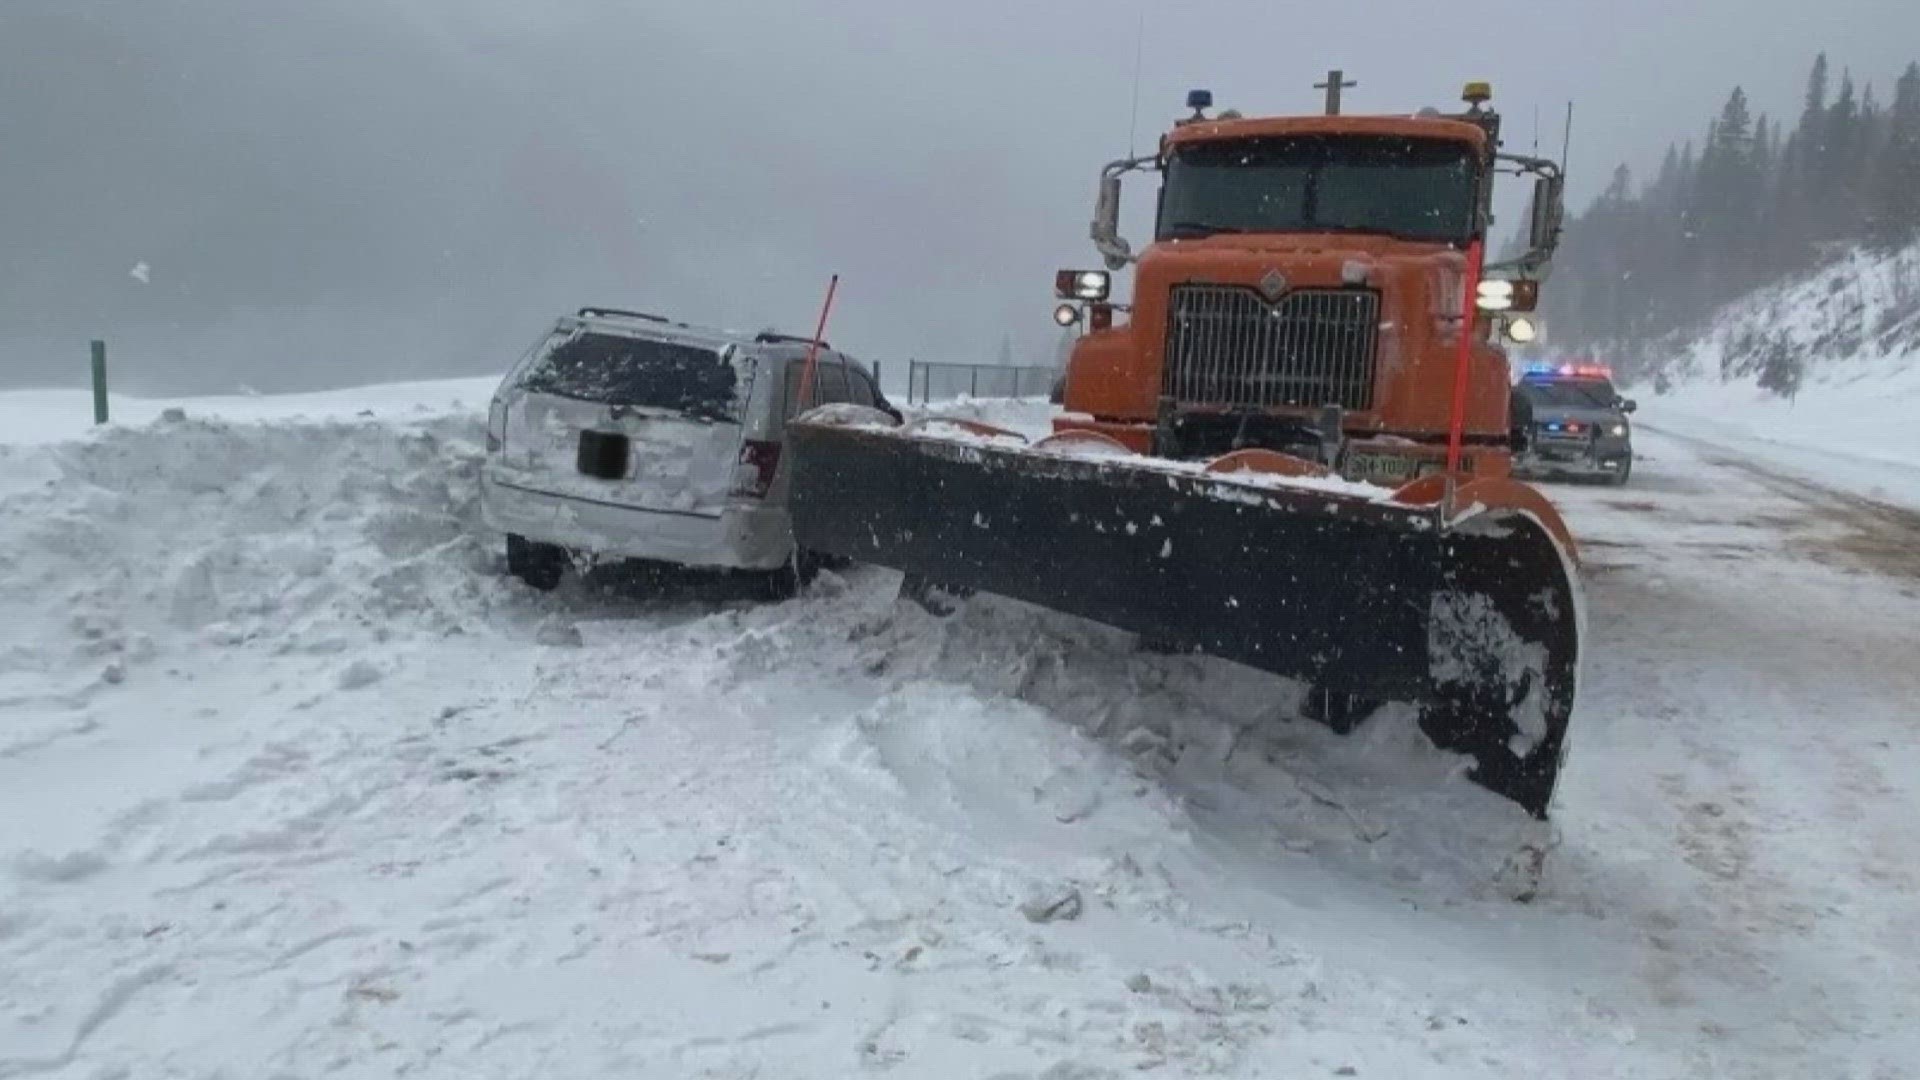 A man fleeing from an officer crashed into a snowplow while the road was closed during a major storm on March 14.